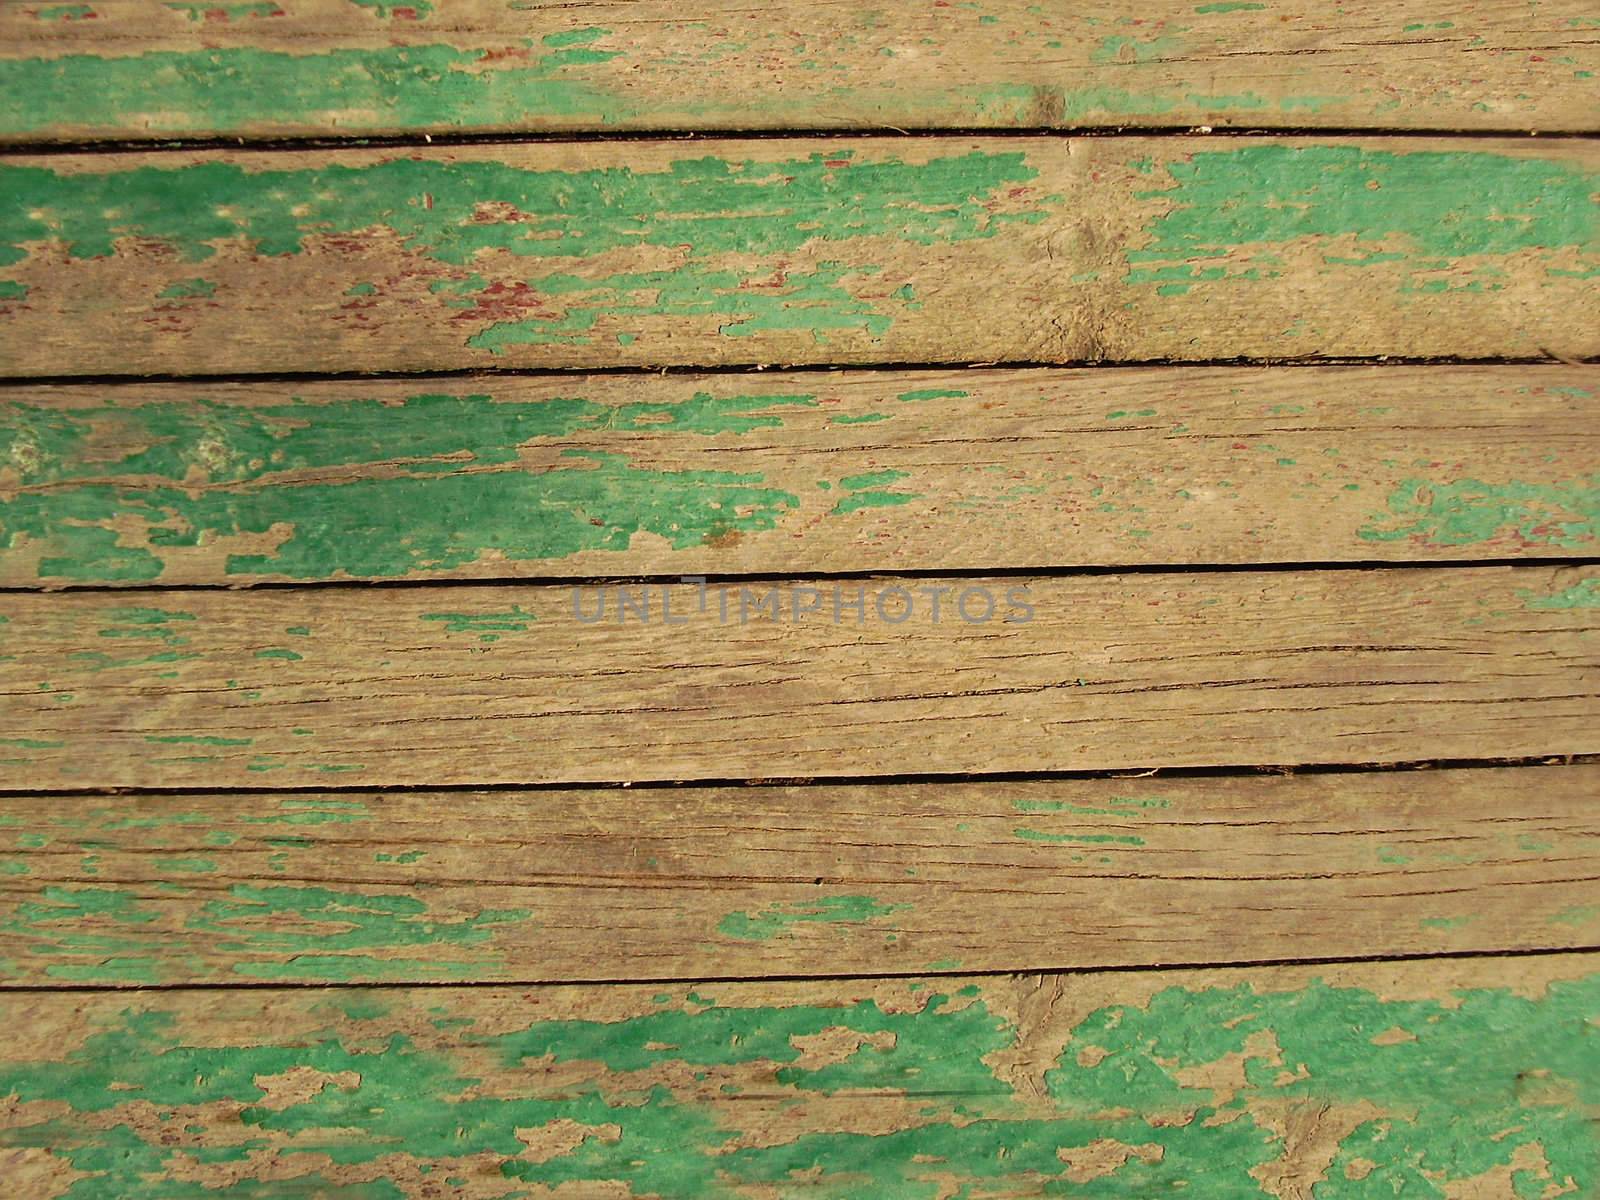  Close up of gray wooden fence panels
       